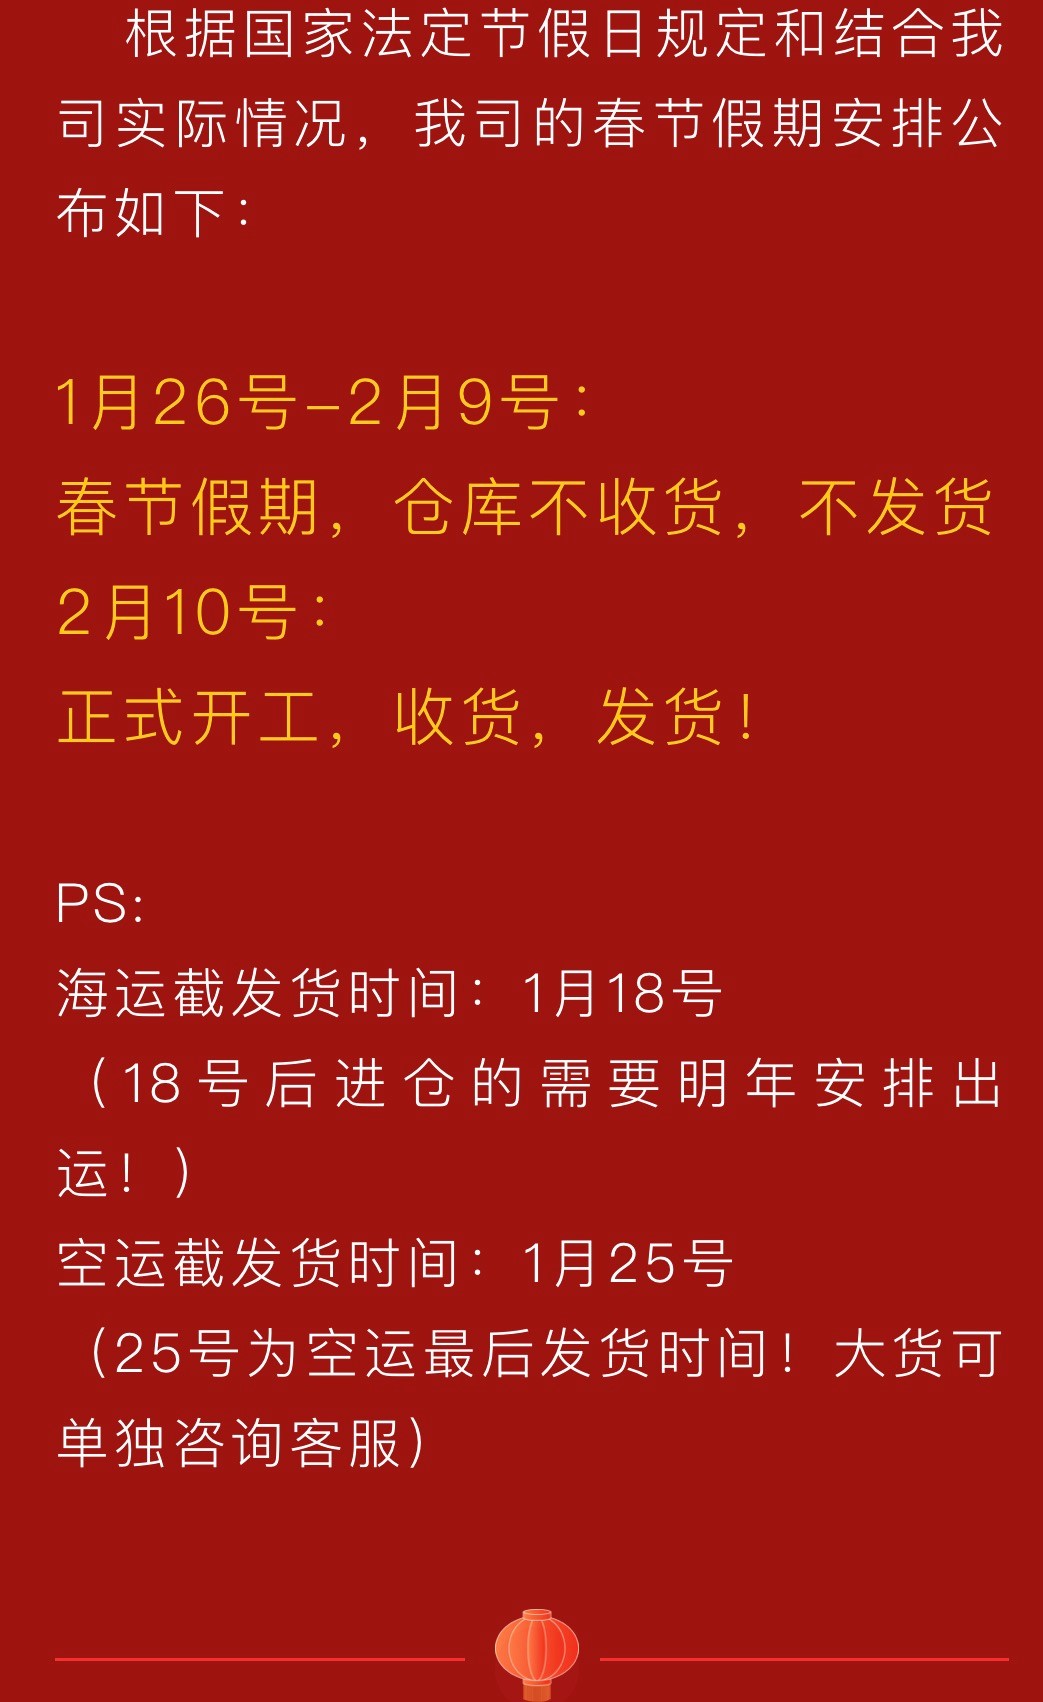 The holiday arrangement notice during 2022 Chinese New Year in Chinese.